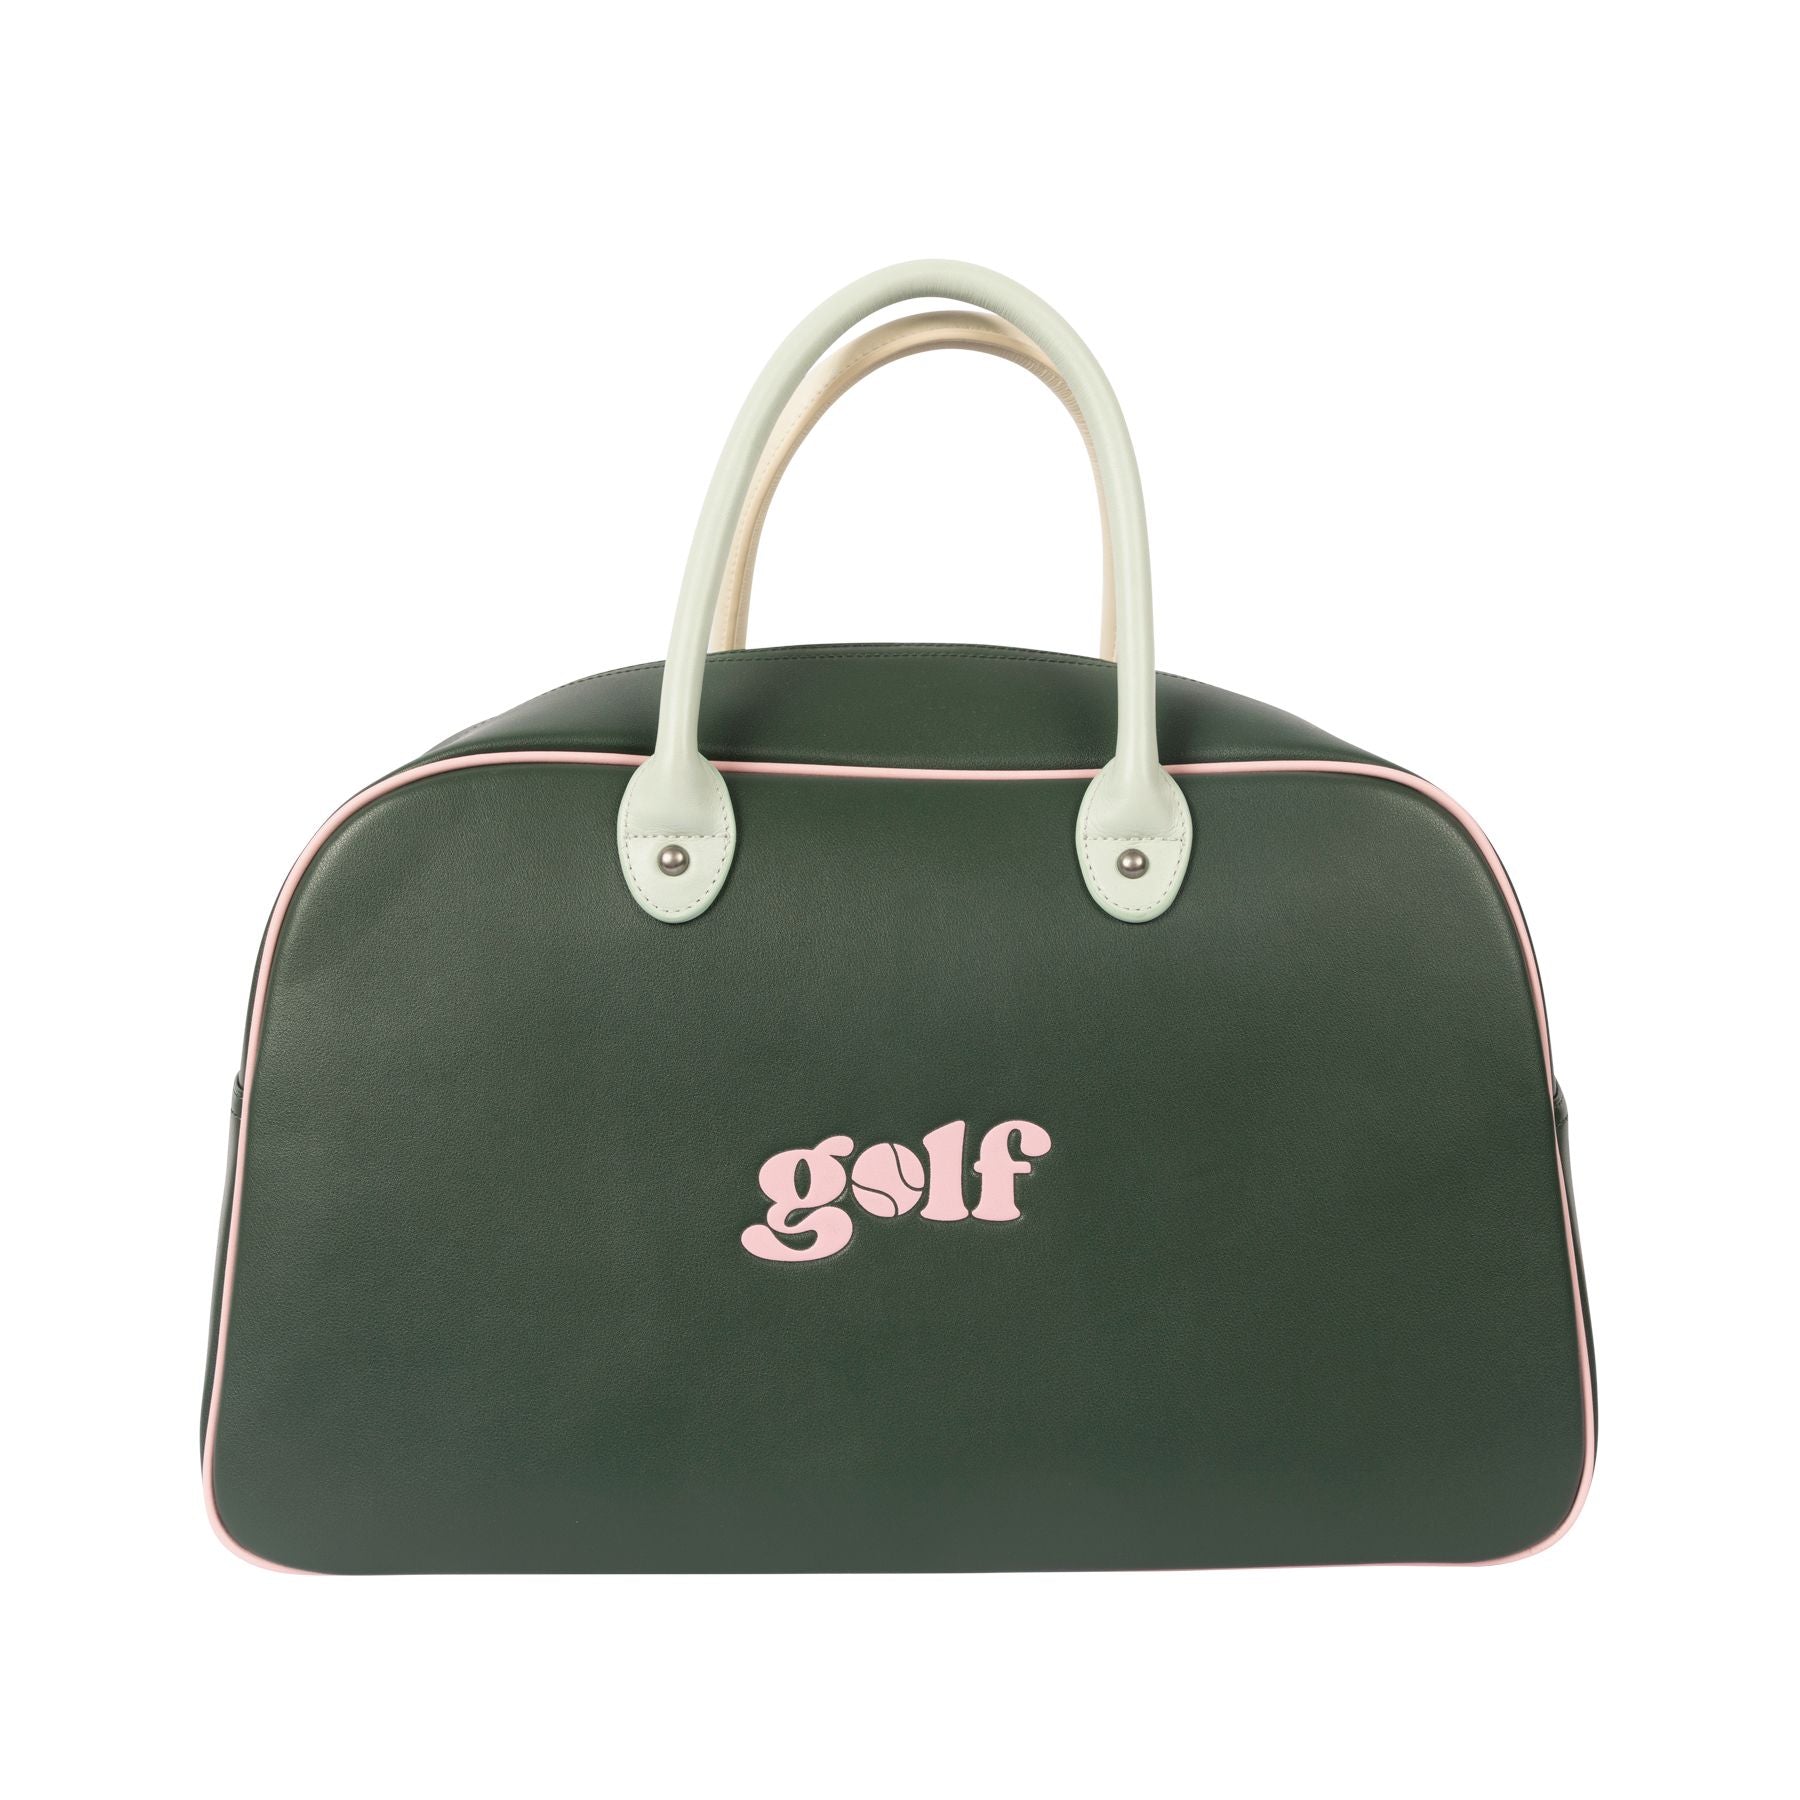 MATCH POINT GYM BAG by GOLF WANG - Greener Pastures Combo